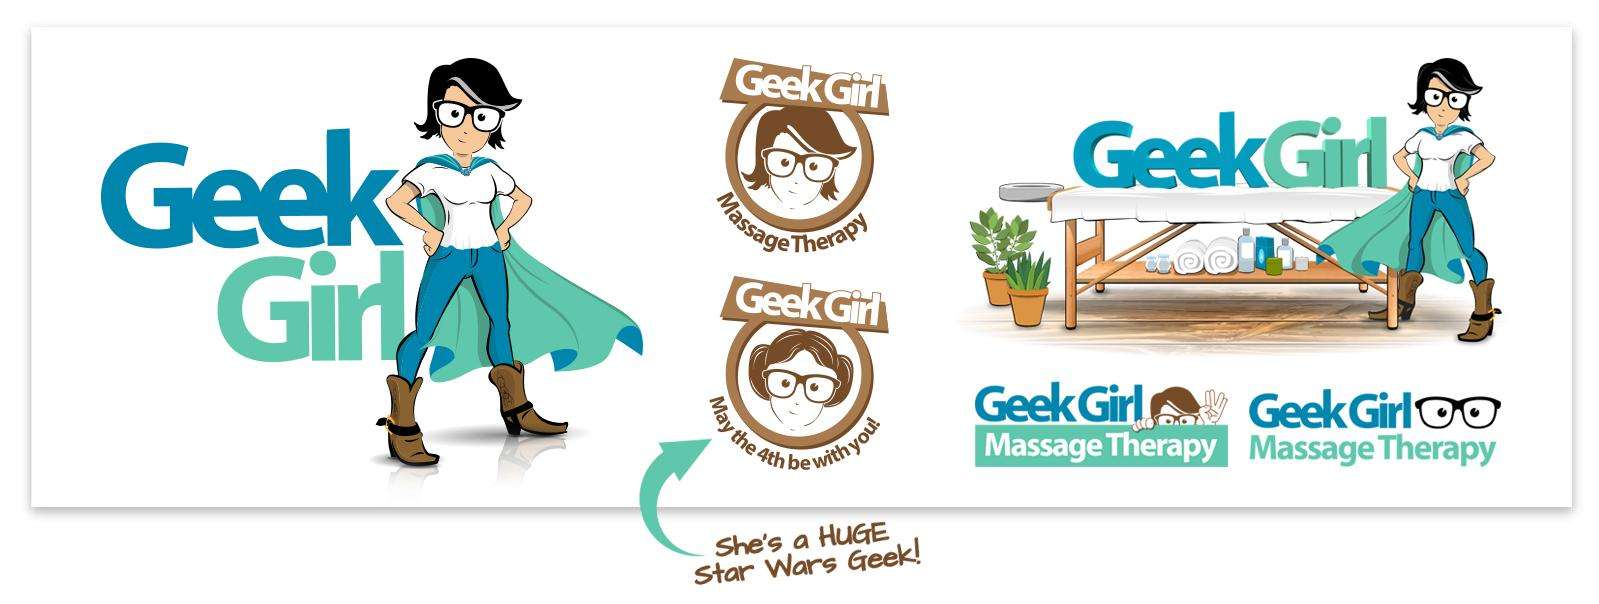 Image of Geek Girl Massage Therapy brand images